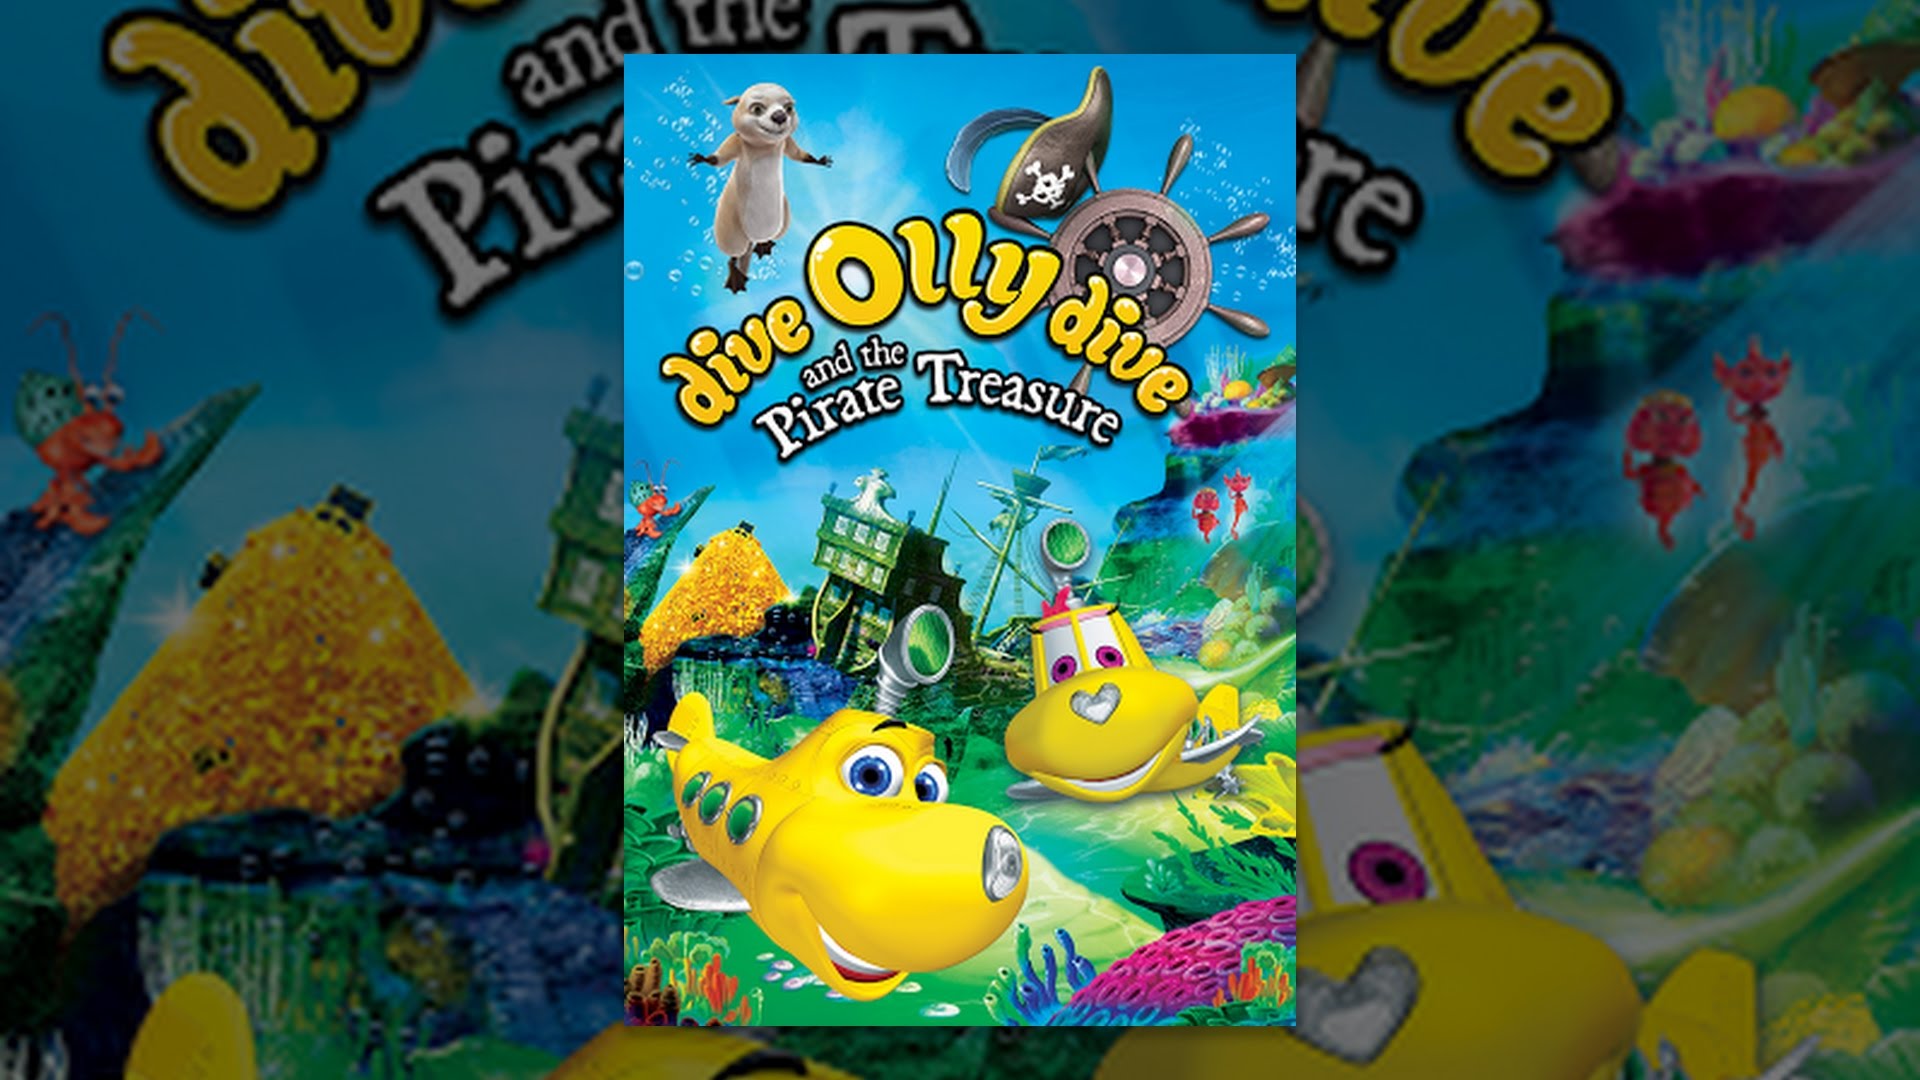 Dive Olly Dive and the Pirate Treasure - YouTube